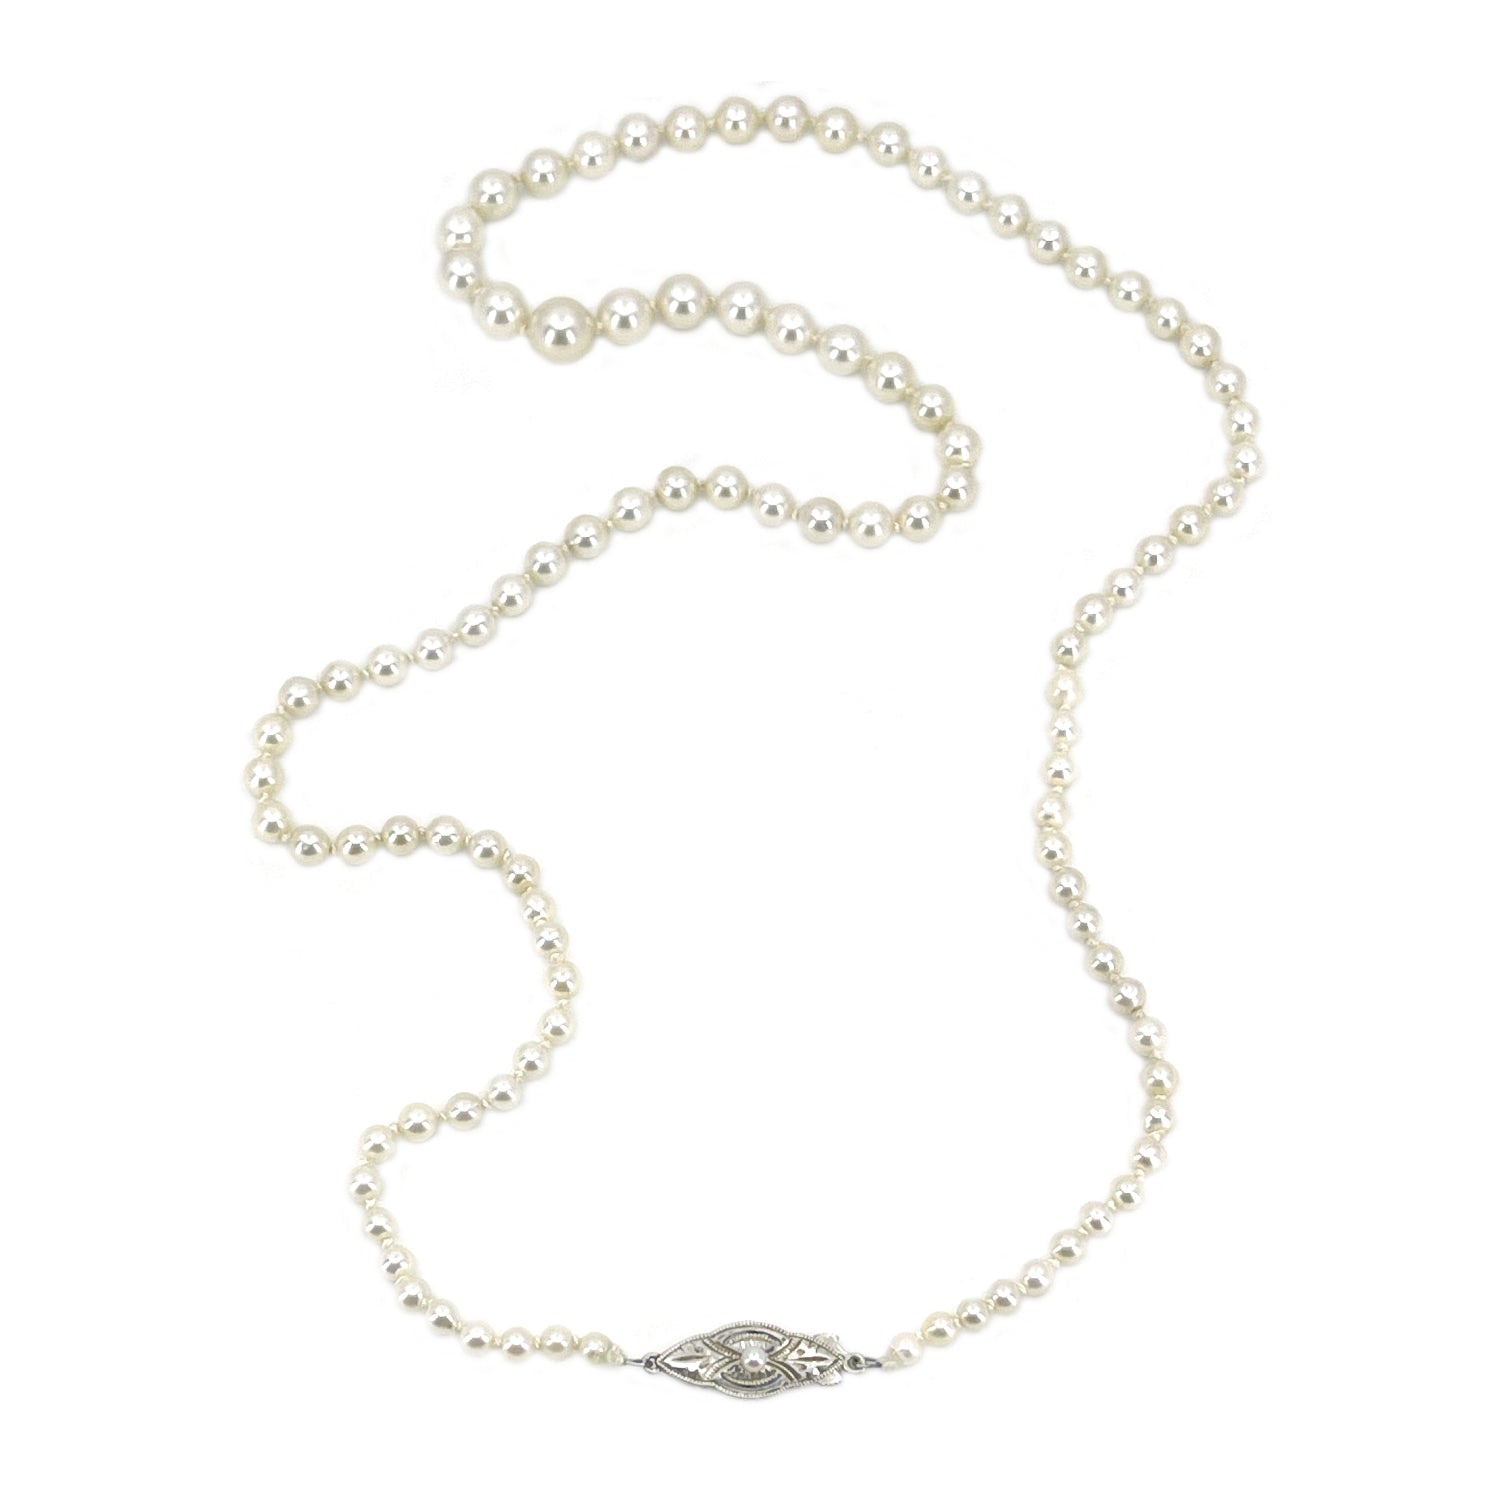 Art Deco Graduated Japanese Saltwater Cultured Akoya Pearl Vintage Necklace - Sterling Silver 21.25 Inch